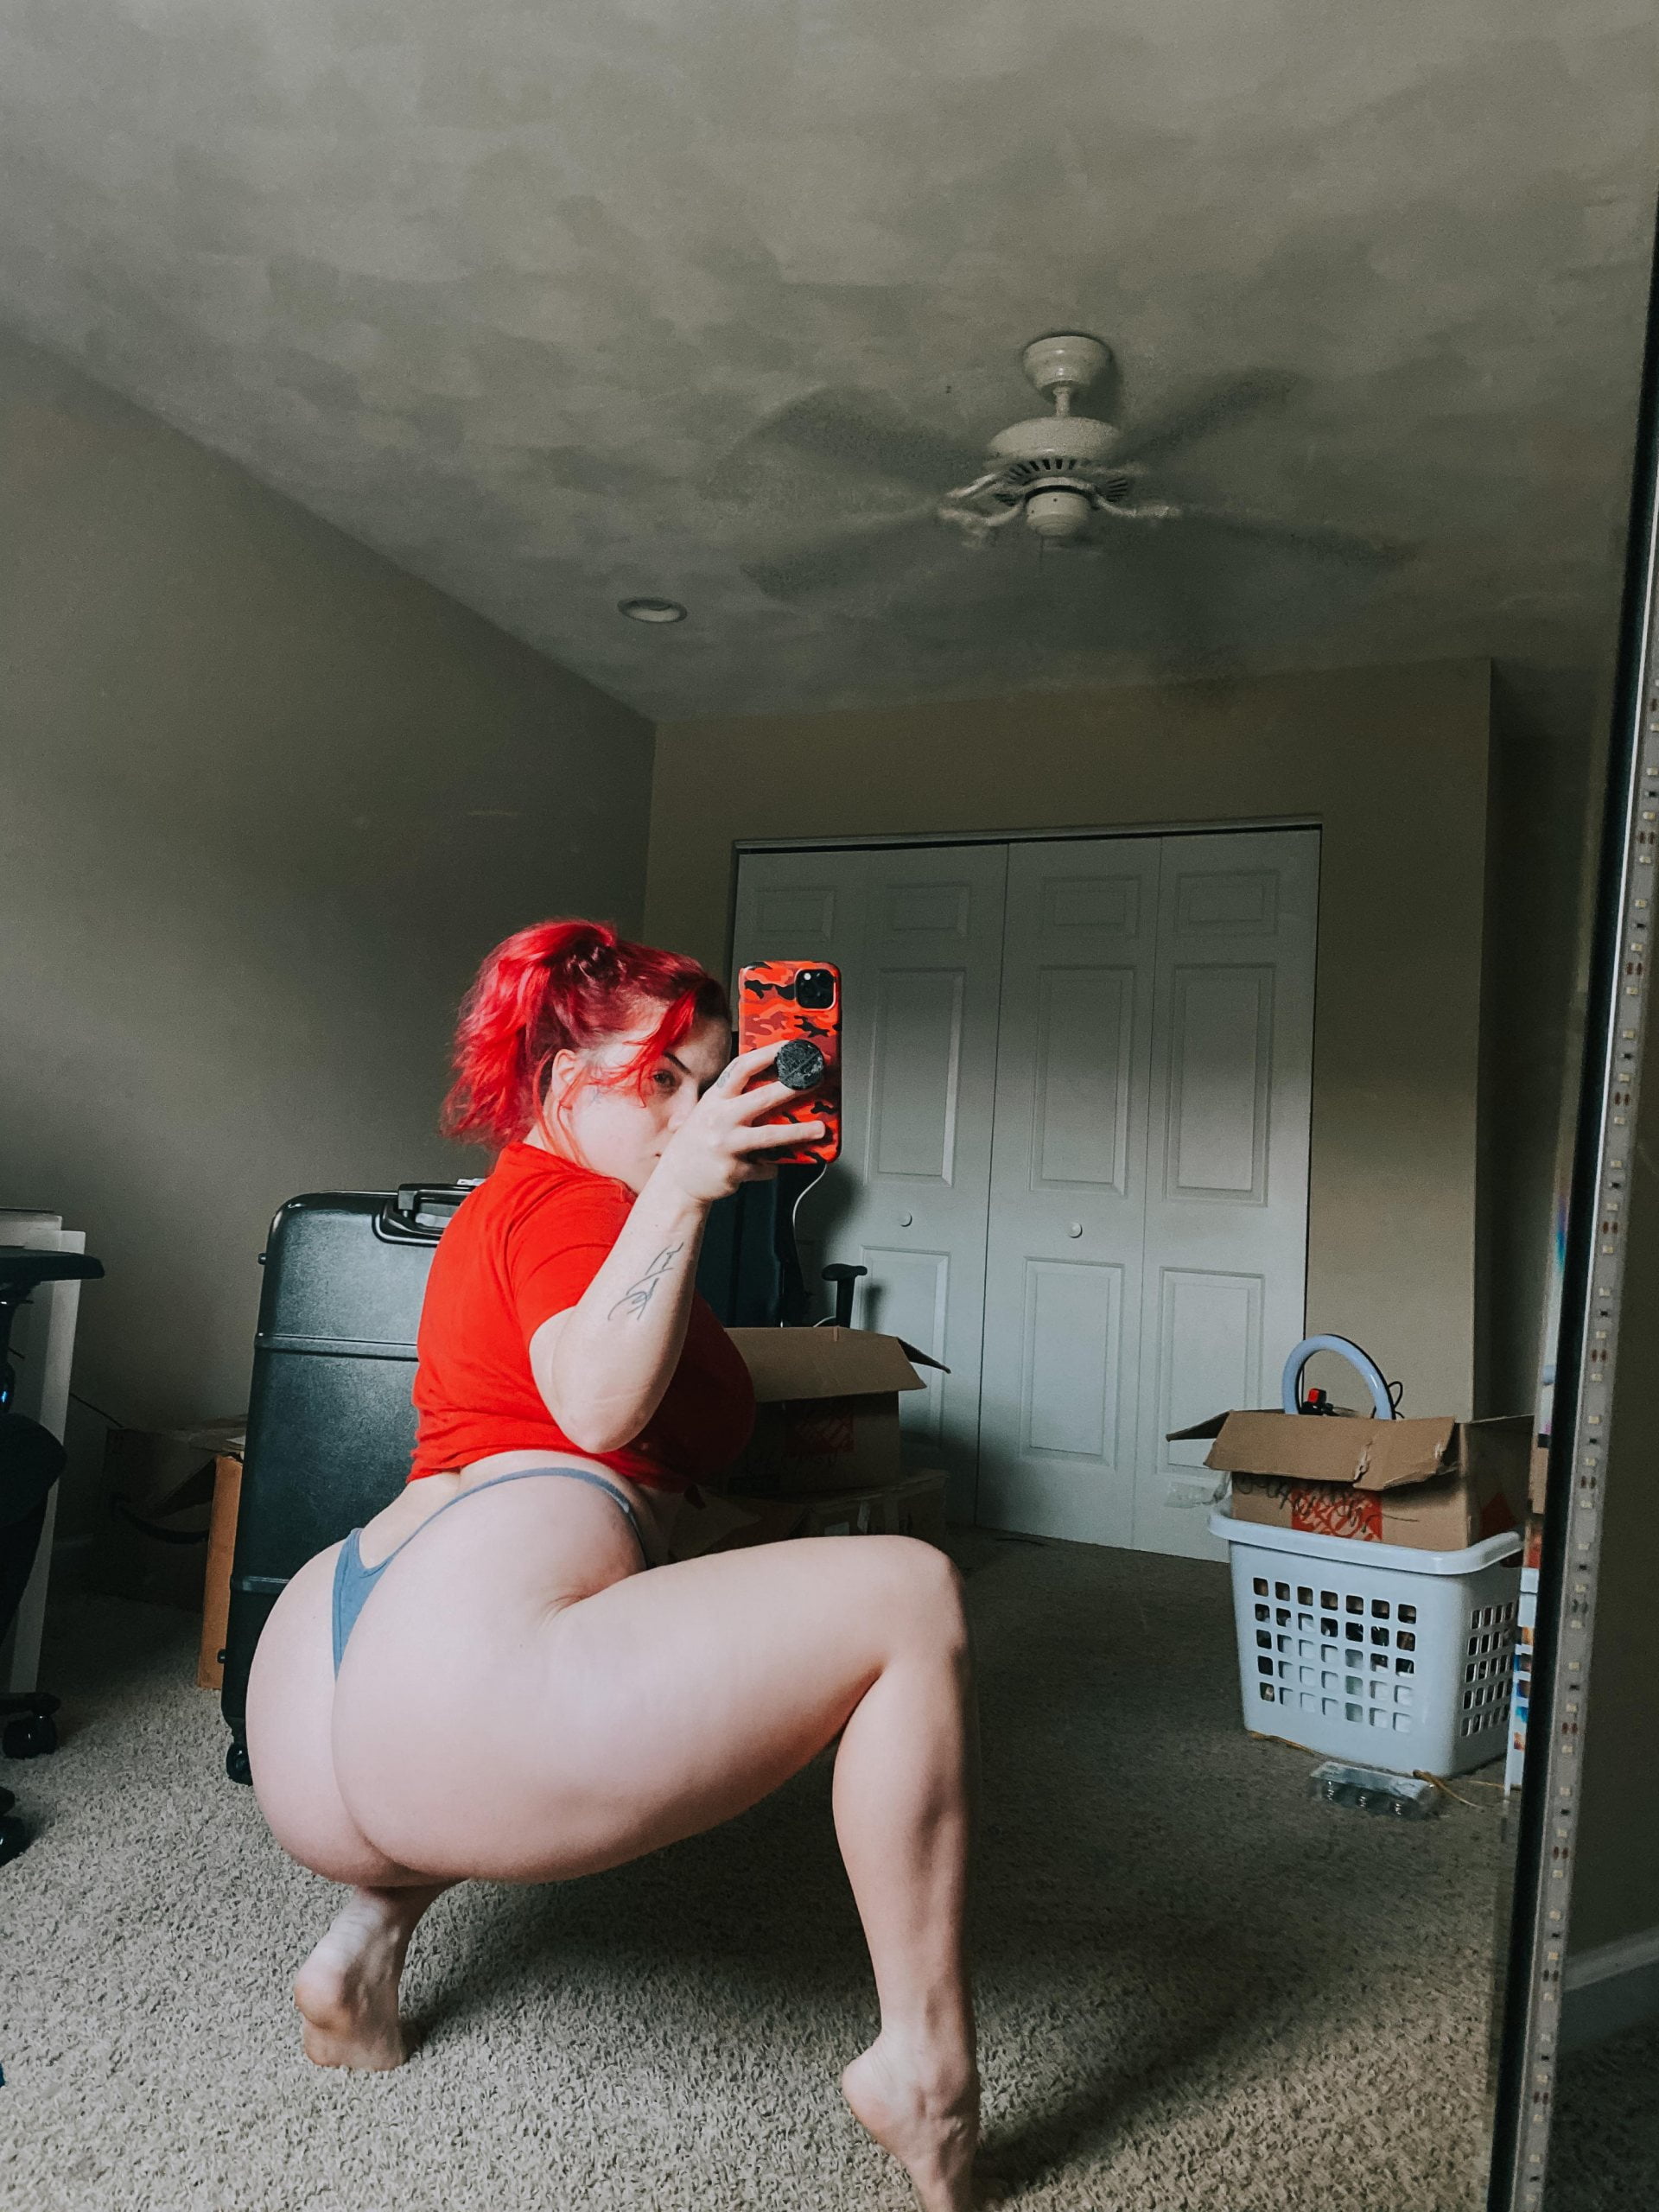 PAWG Let me sit this ass on ya. - HAPPY BOOTY